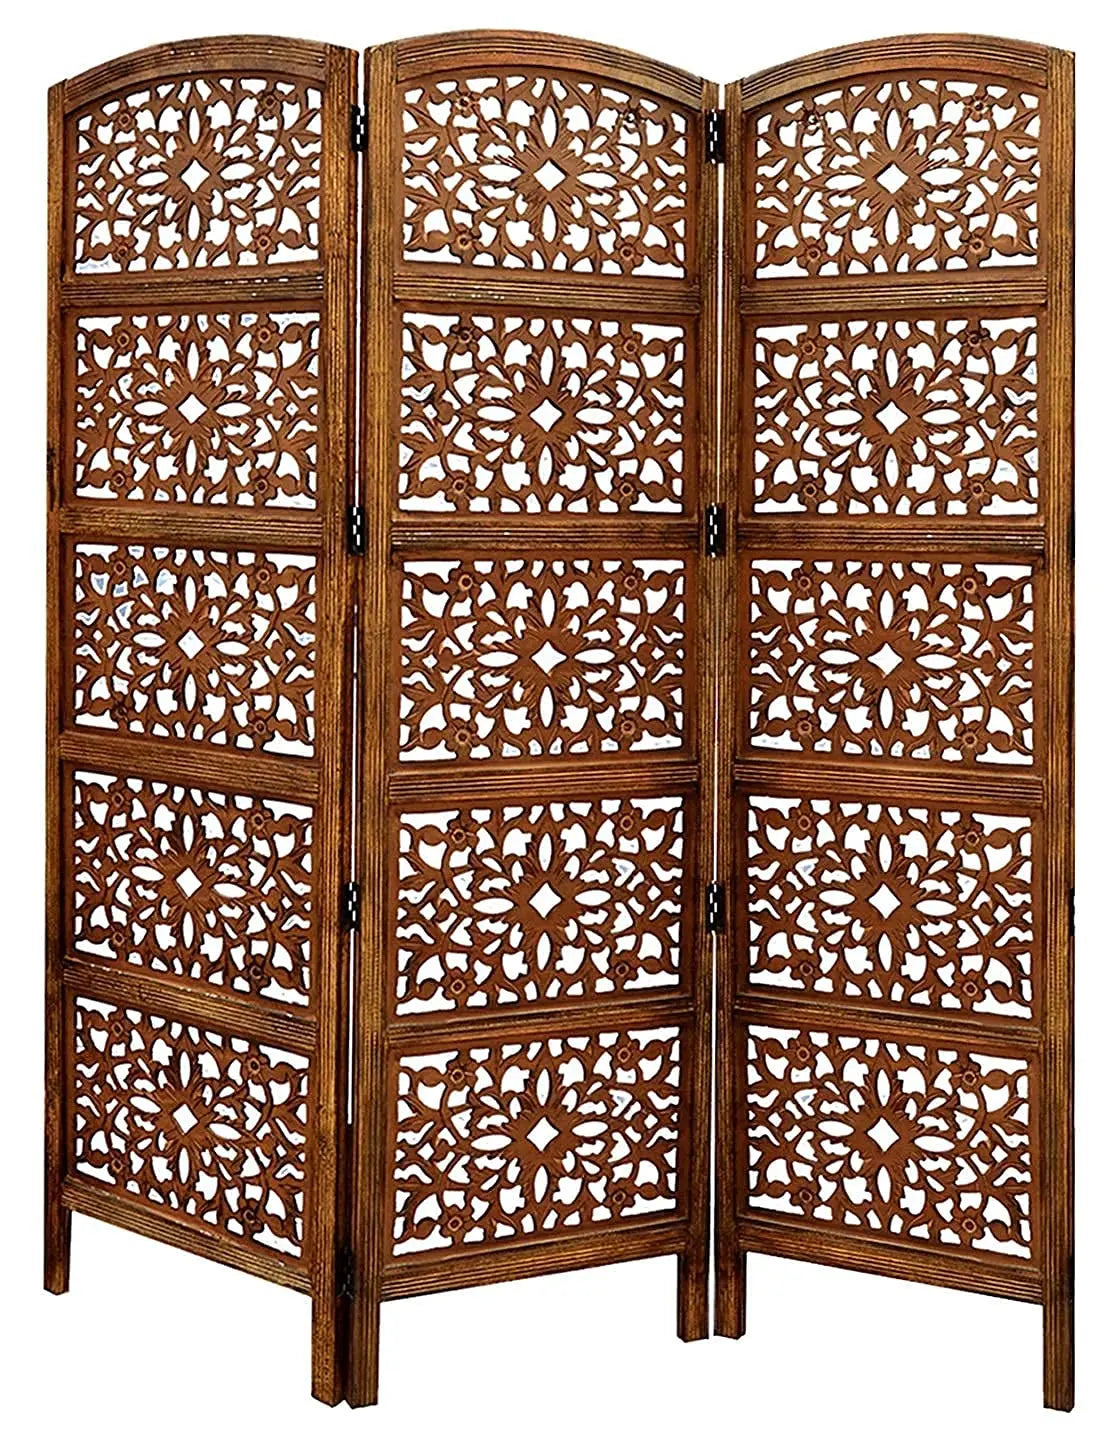 Partition Lump- Wooden Room Partition for Living Room Room Divider, Partition for Pooja Room, Screen Separator, Wall Divider for Hall, Bedroom, Office, Pooja Room Furneez